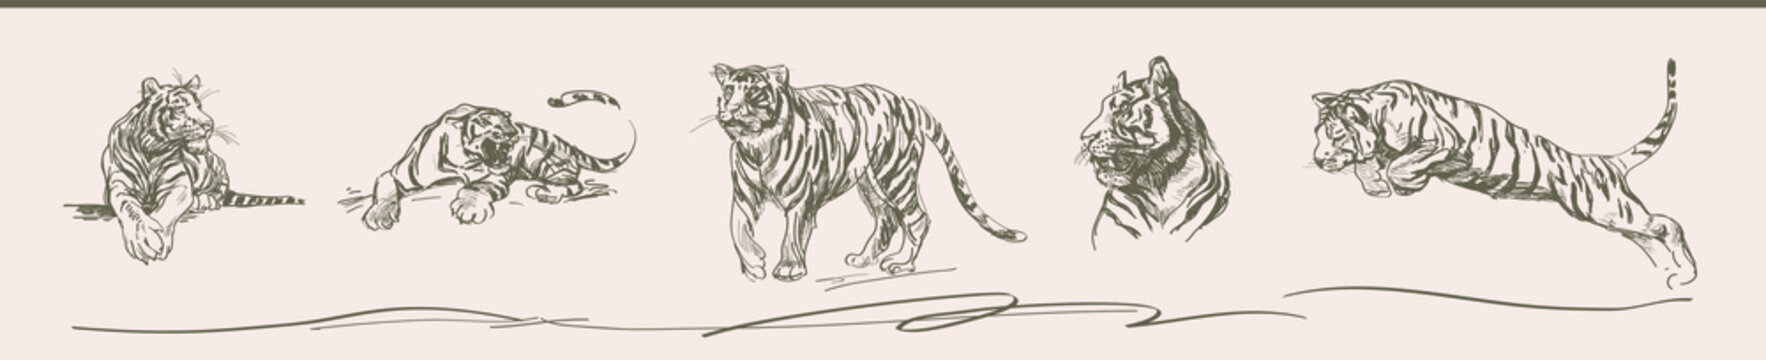 Tiger vector. The symbol of the new year is 2022, 2034, 2046, 2058. A pencil drawing on a white background of a tiger in different poses: jumping, sitting, growling.